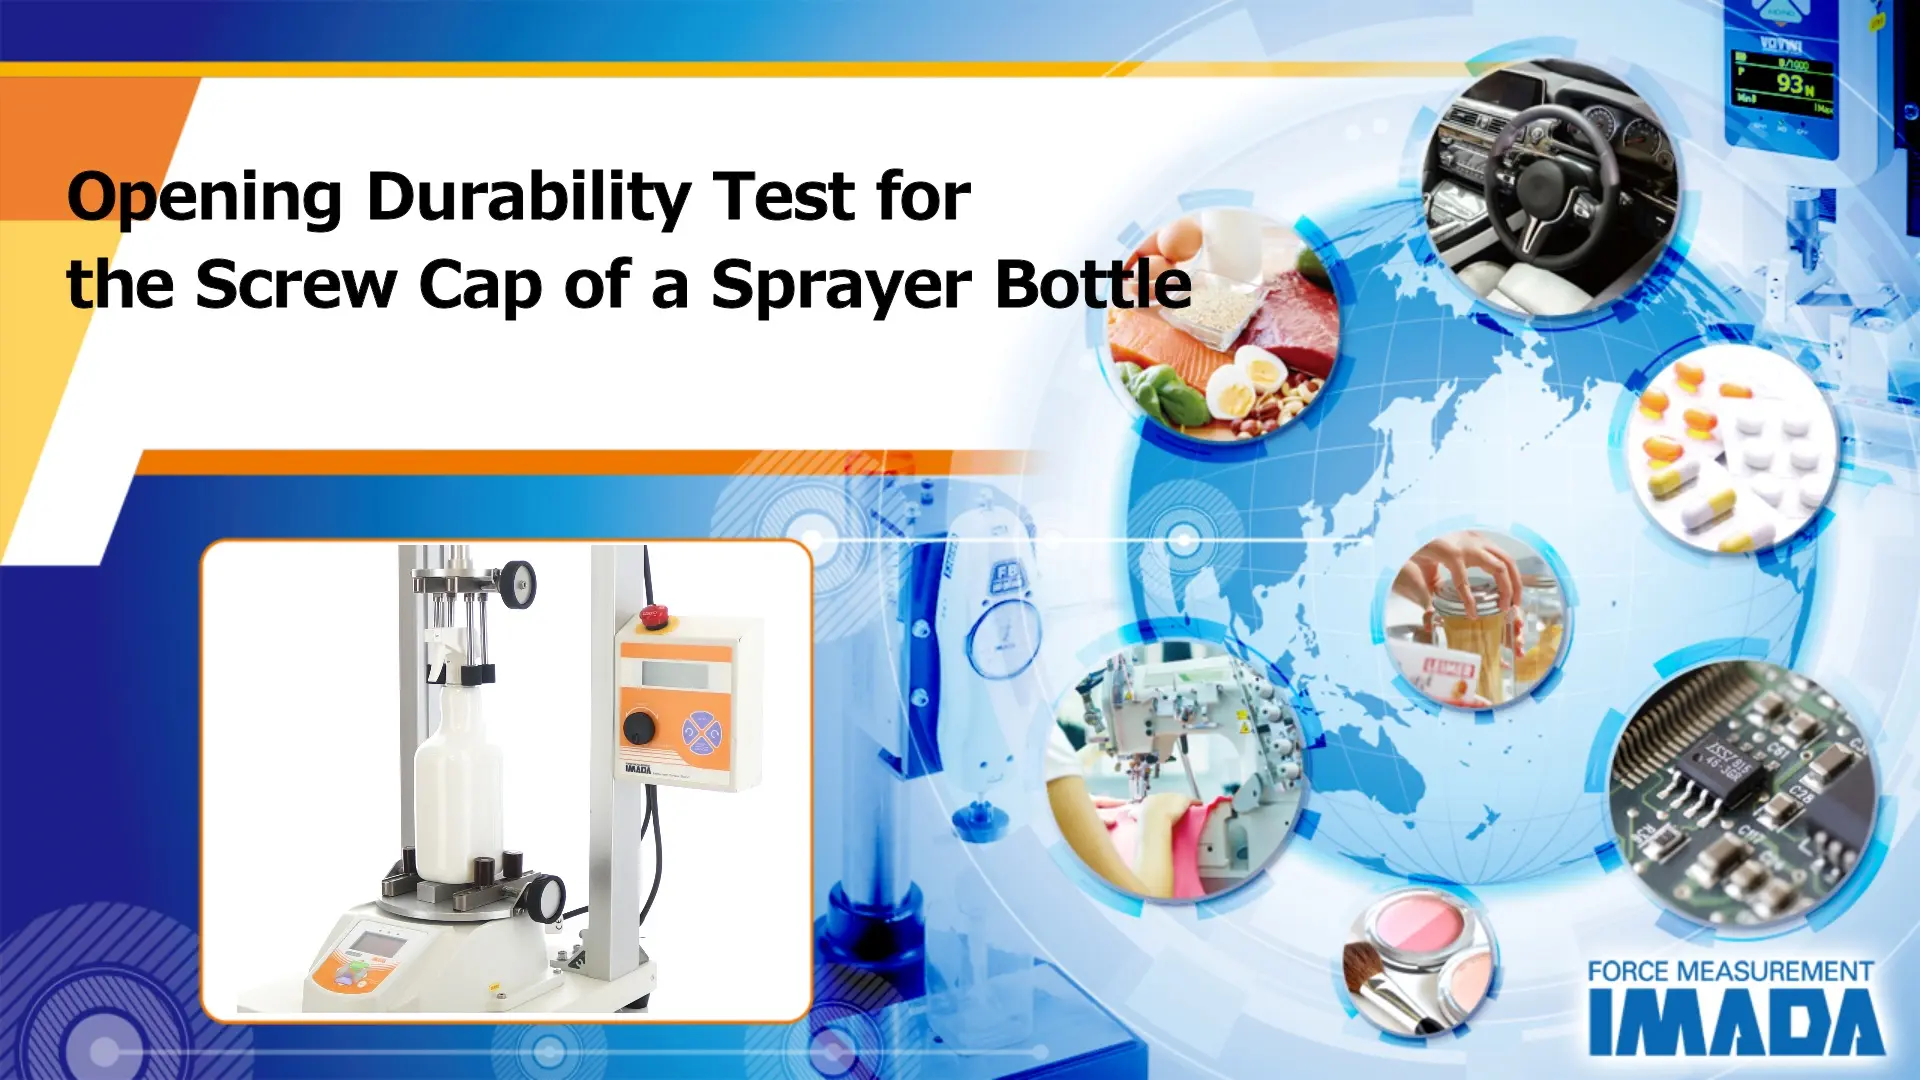 Opening Durability Test for the Screw Cap of a Sprayer Bottle